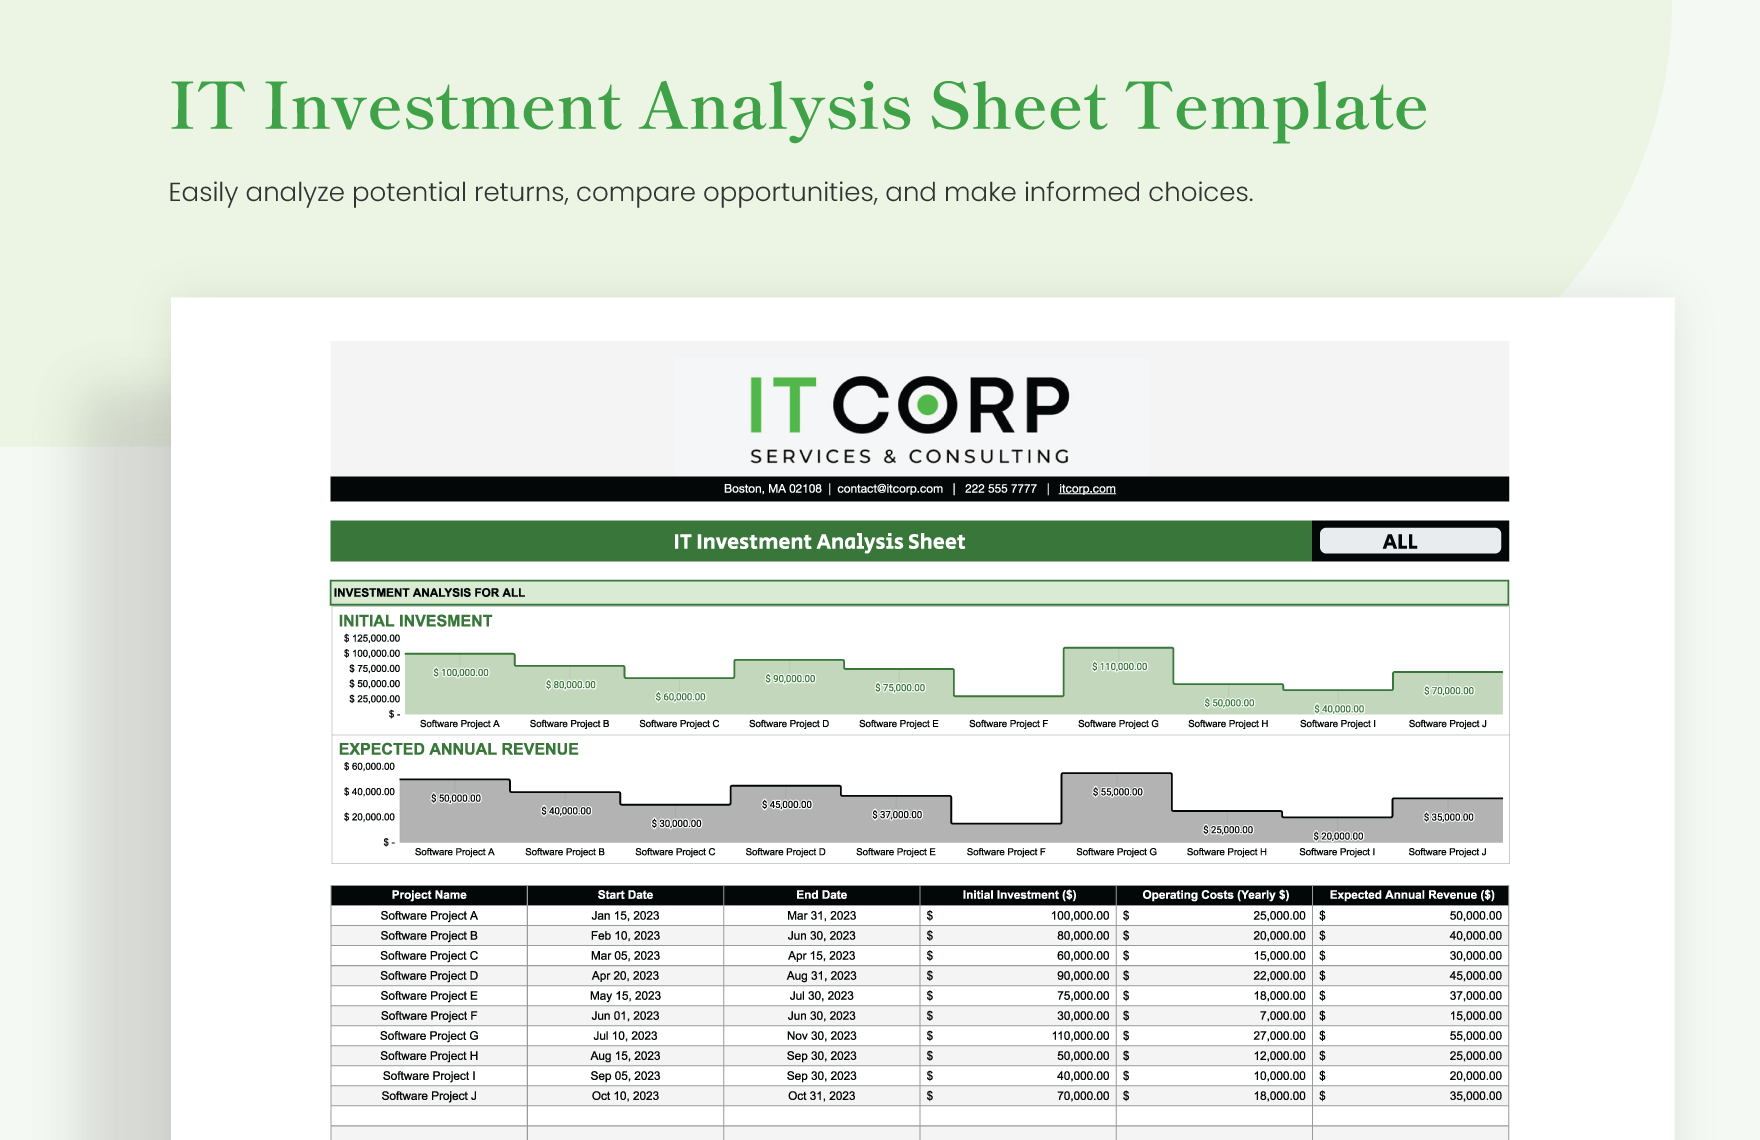 IT Investment Analysis Sheet Template